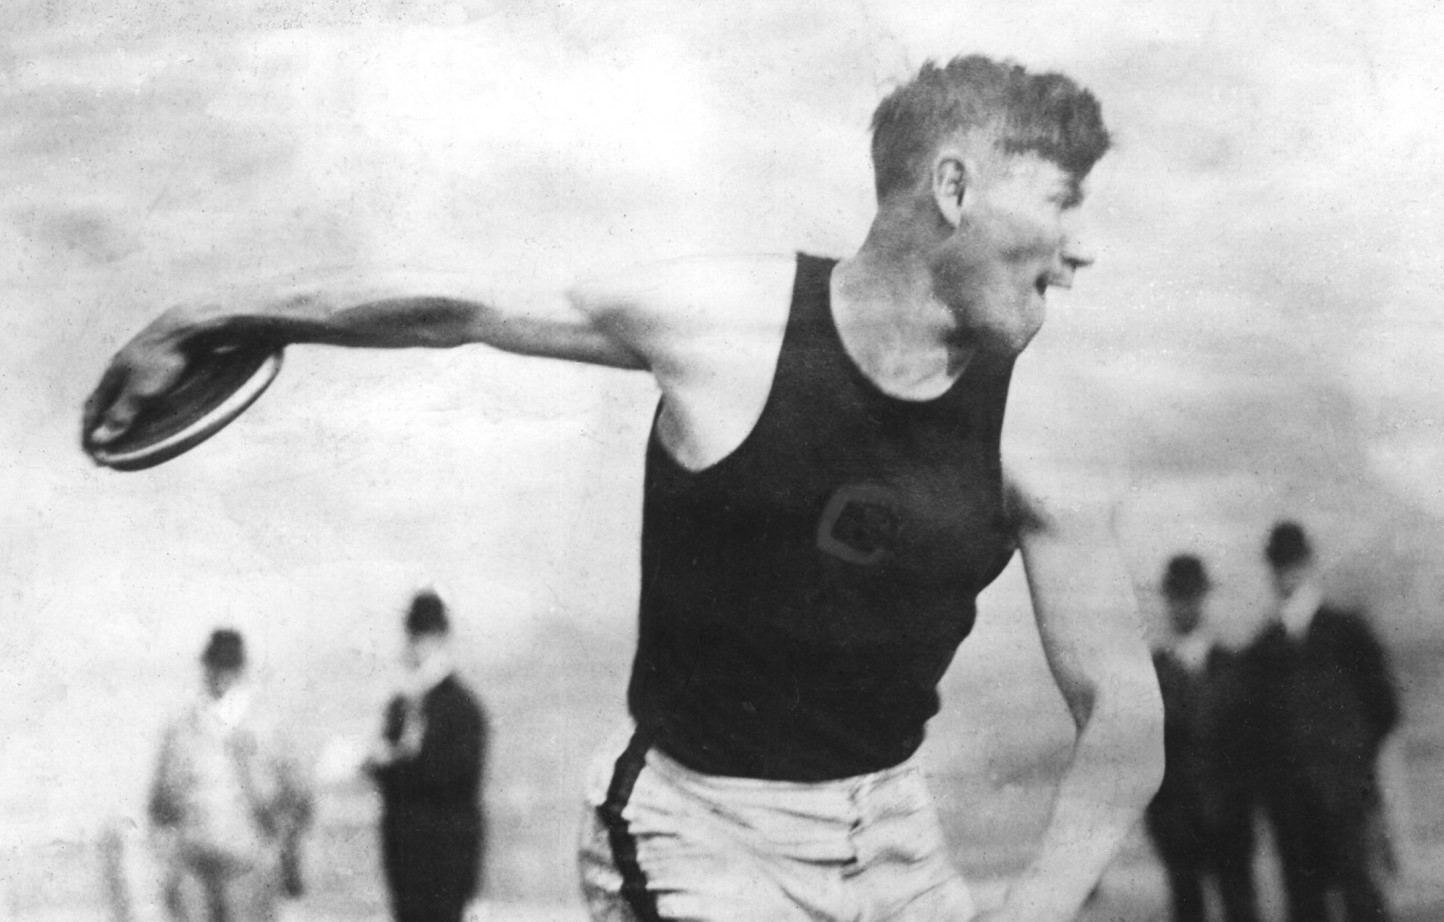 110 years after he won pentathlon and decathlon gold, Jim Thorpe has once again been recognised as the sole gold medallist in both events ©Getty Images